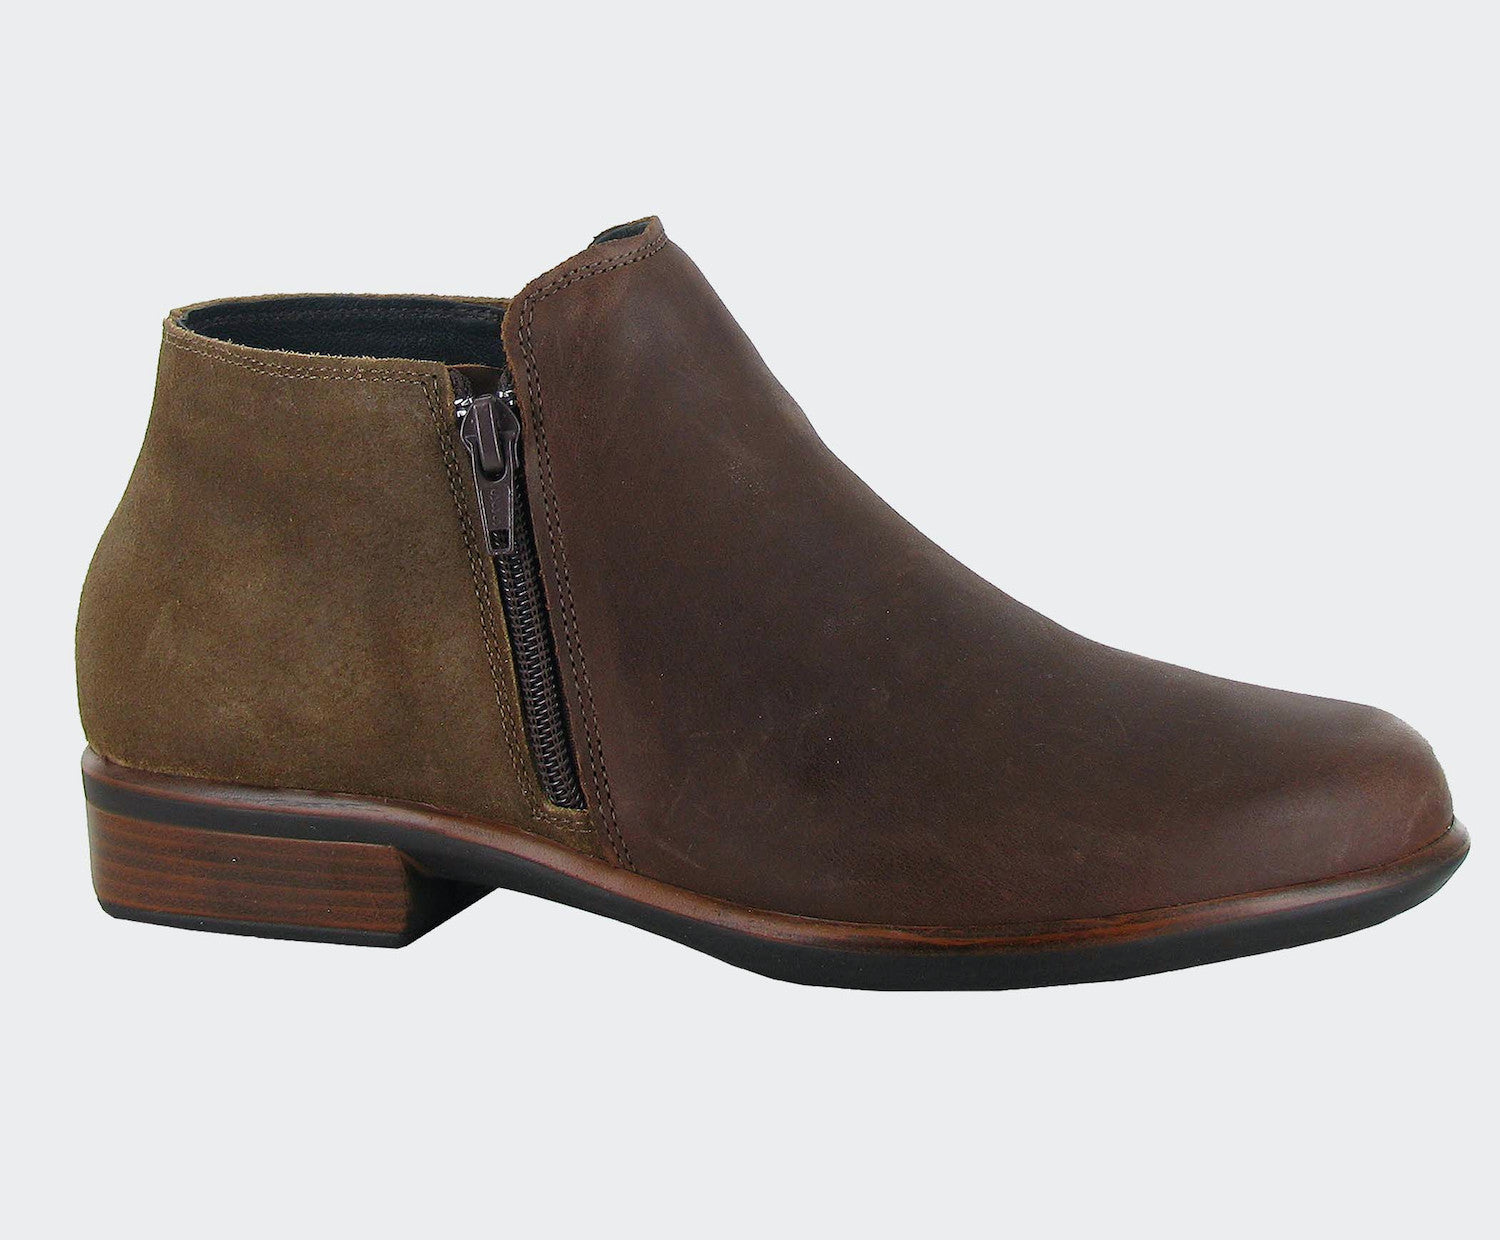 NAOT Helm Cognac Leather Brown Suede